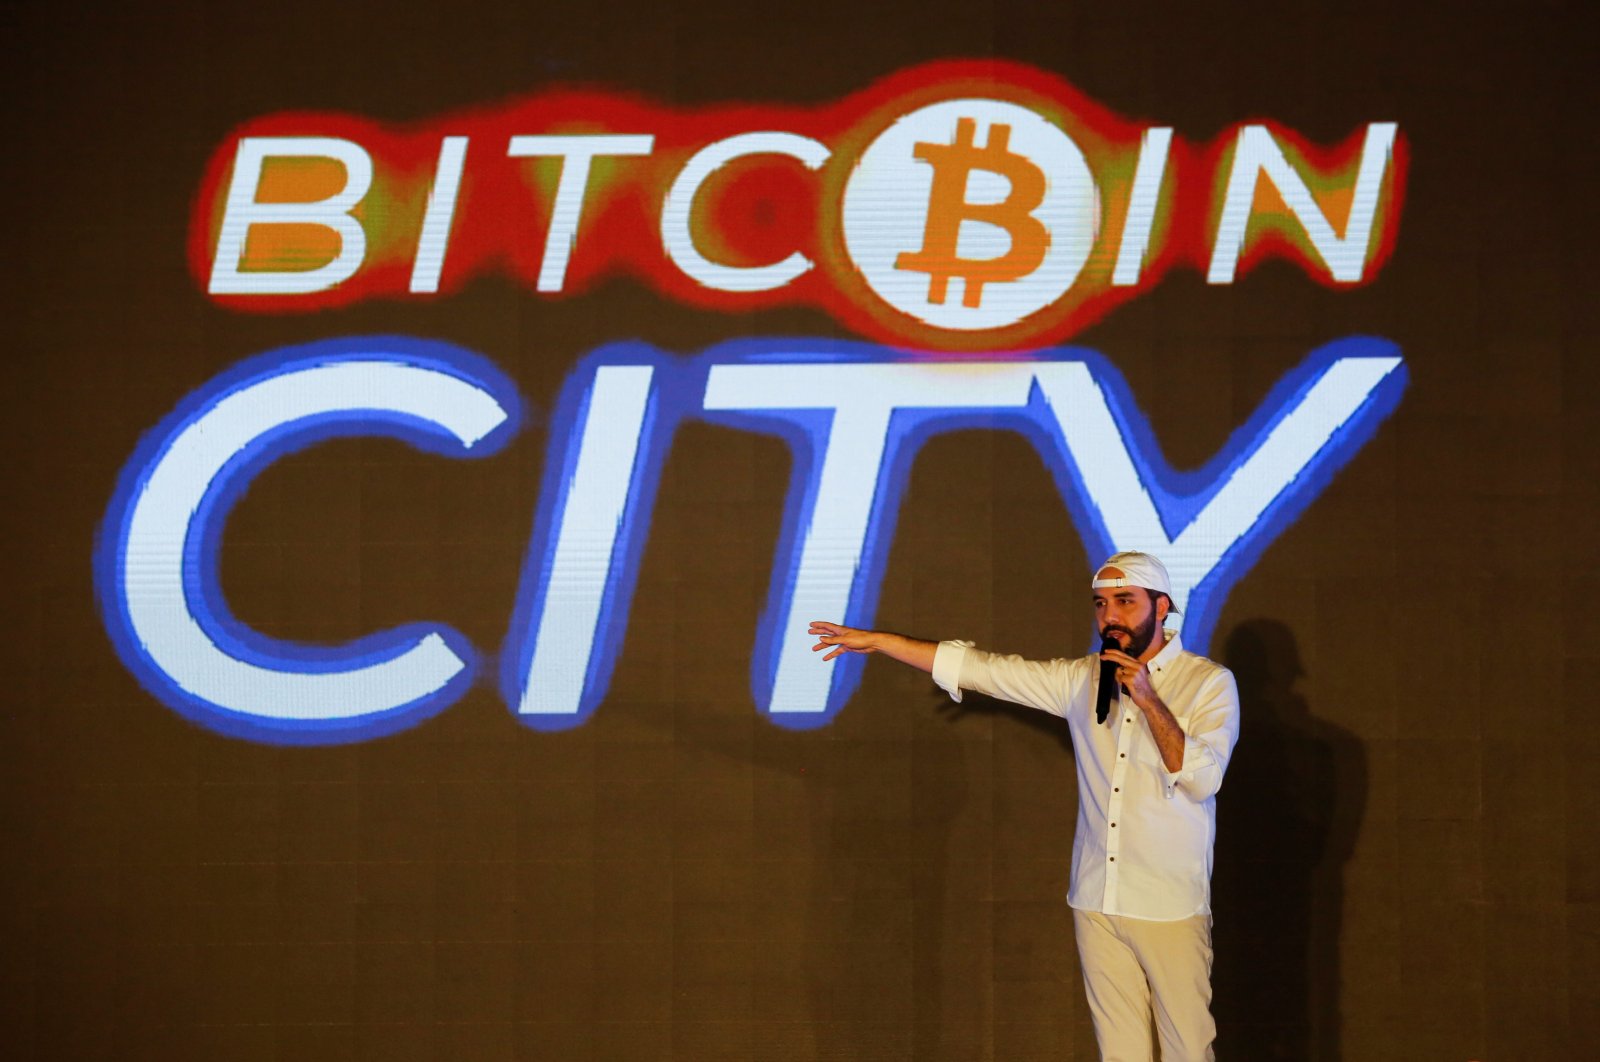 El Salvador&#039;s President Nayib Bukele speaks at the closing party of &quot;Bitcoin Week” where he announced the plan to build the world&#039;s first &quot;Bitcoin City,&quot; in Teotepeque, El Salvador, Nov. 20, 2021. (Reuters Photo)